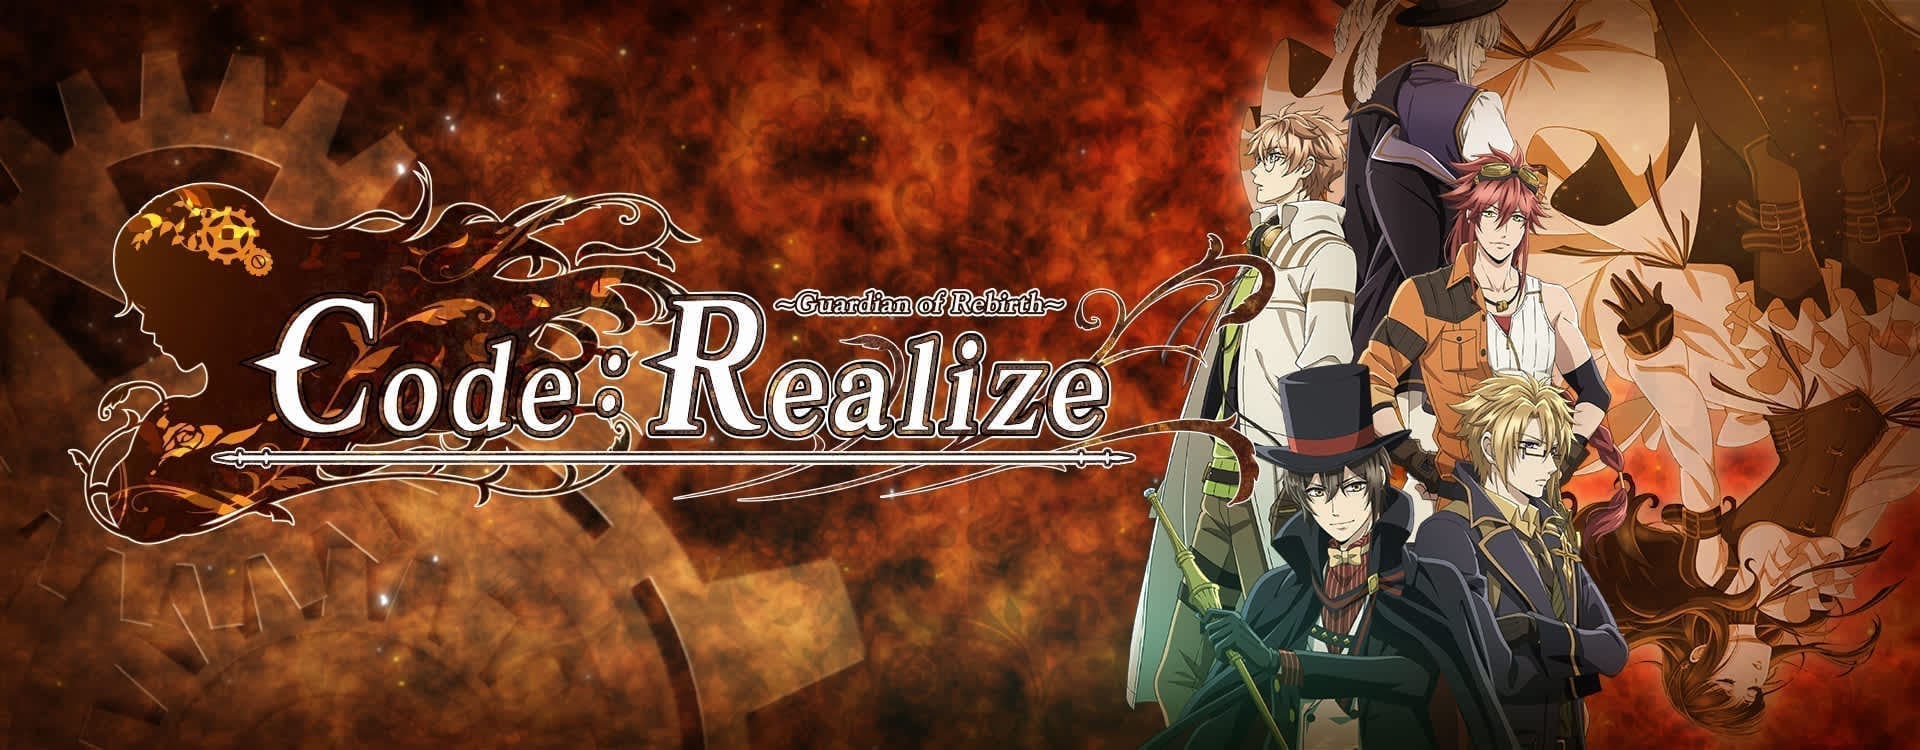 [Recenzja] Code:Realize - Guardian of Rebirth - tainted love